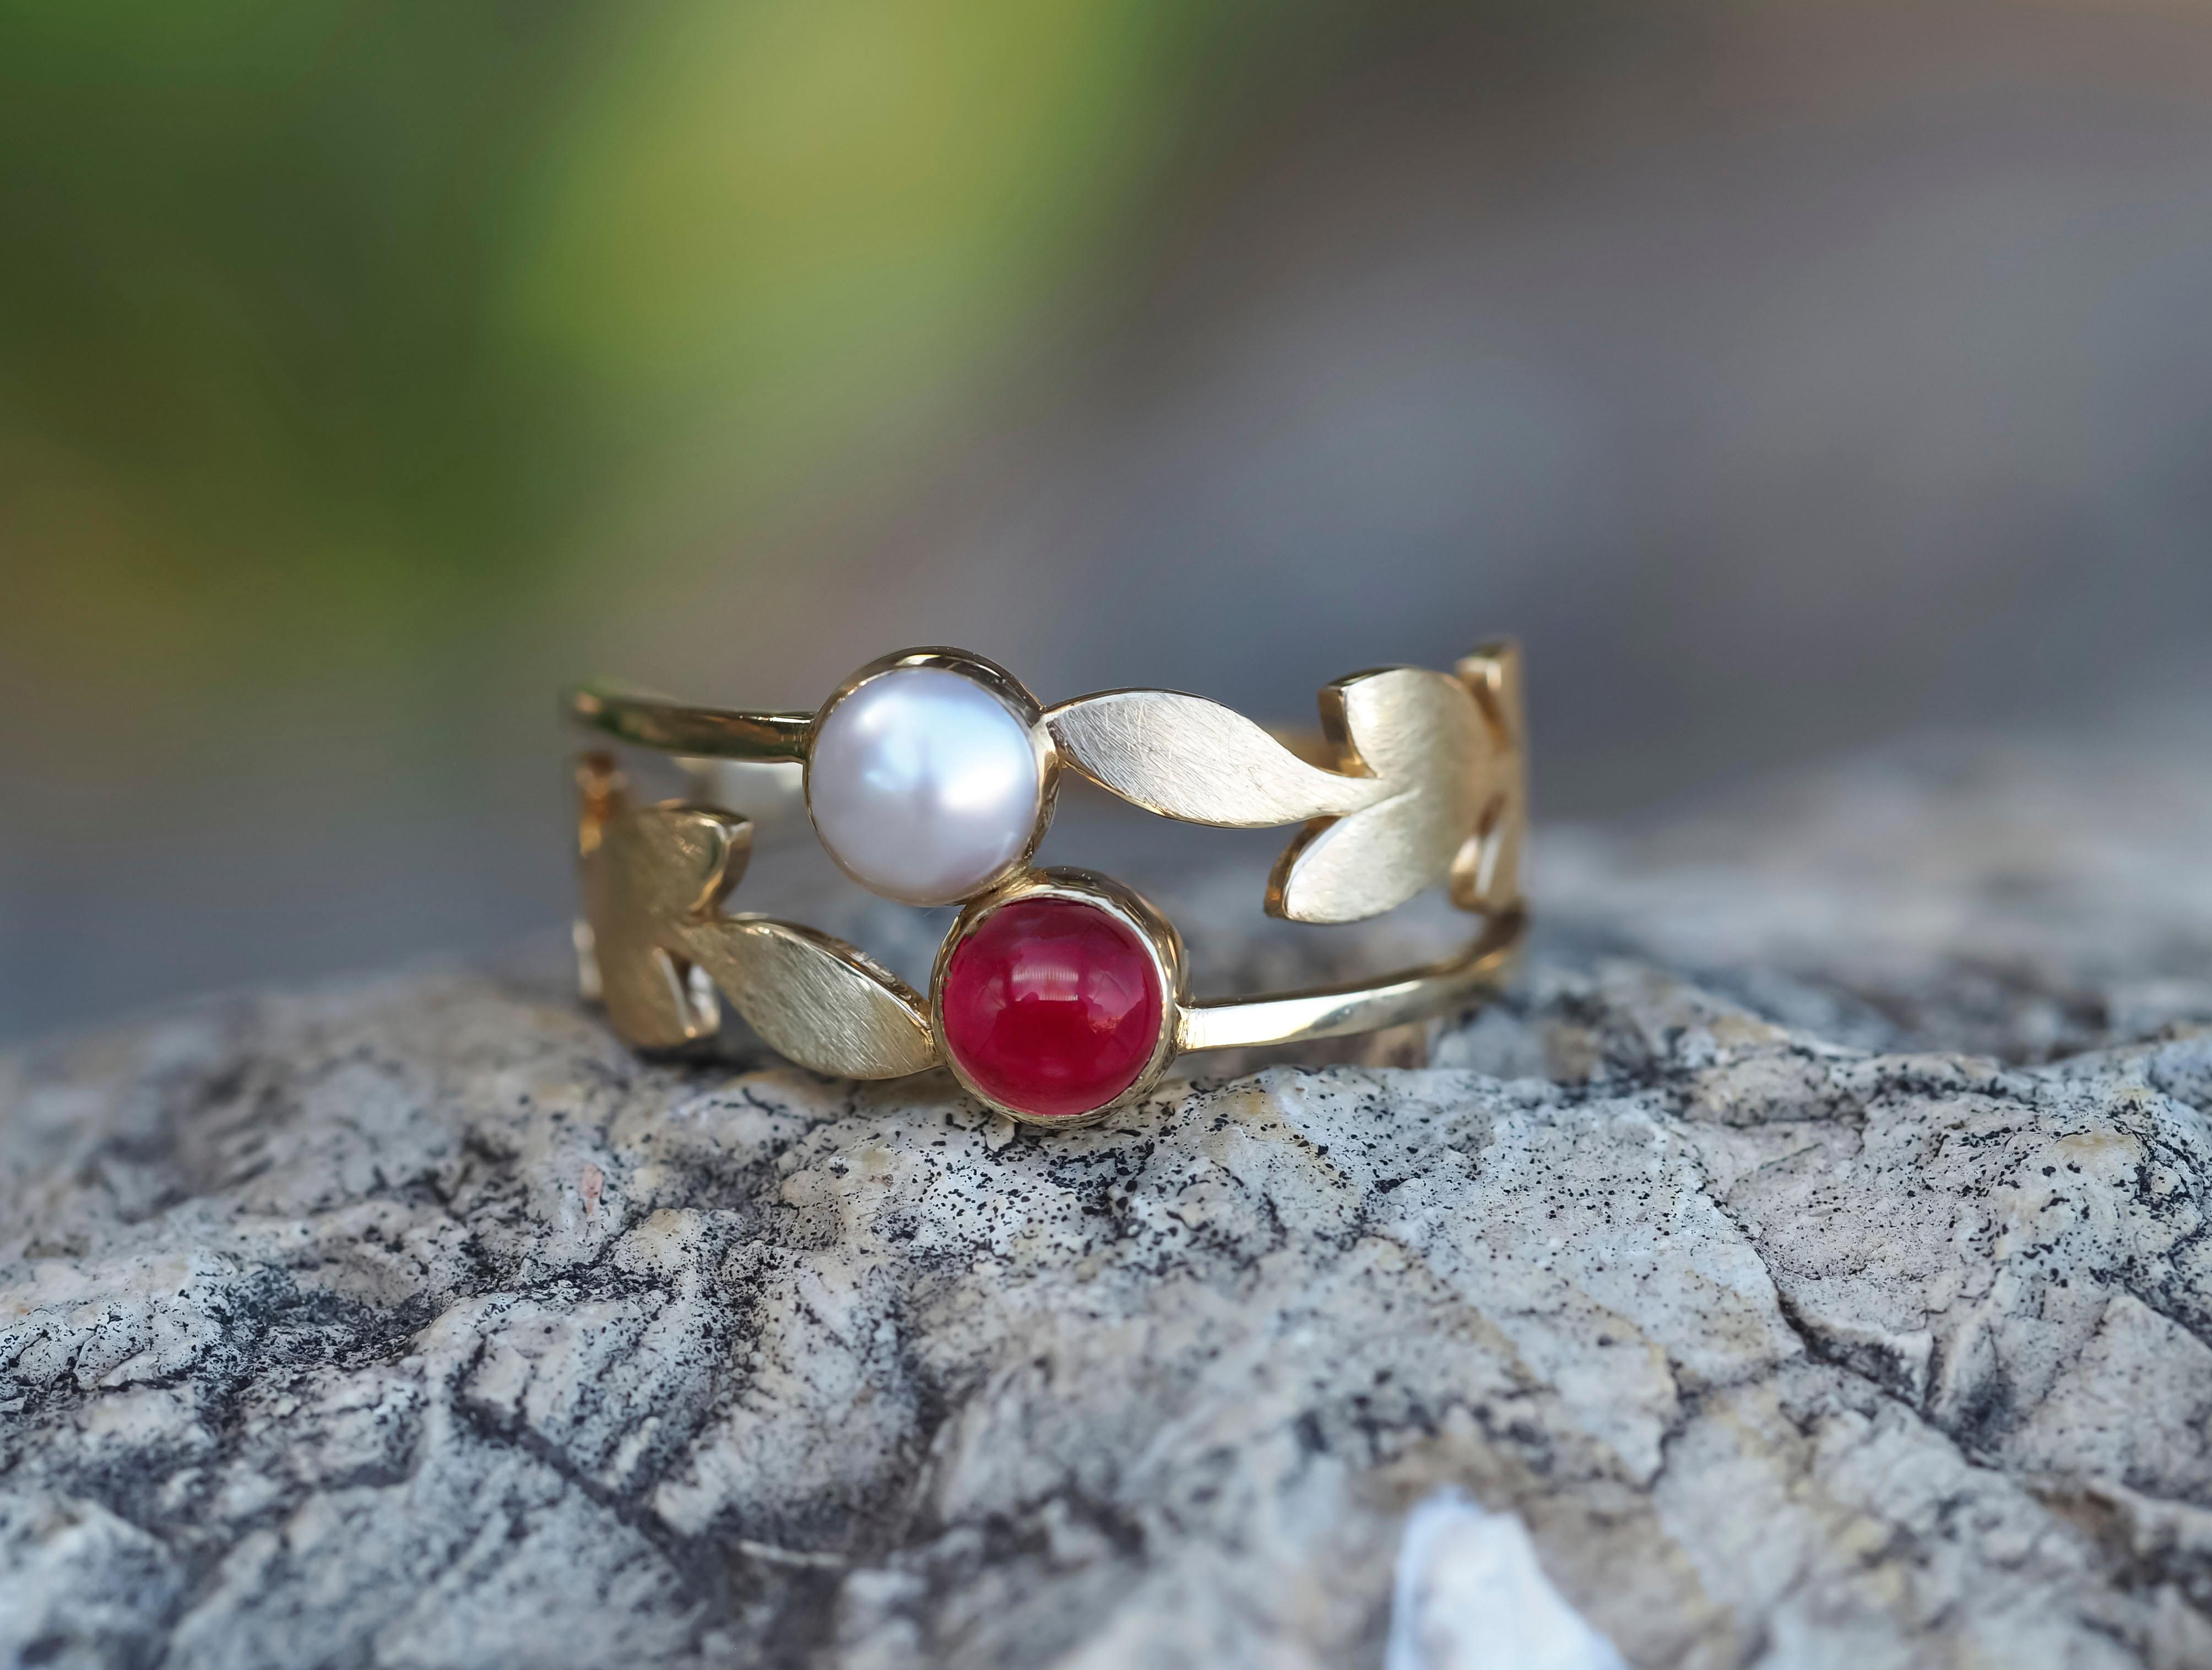 For Sale:  Toi and moi ring with ruby and pearl in 14k gold 3